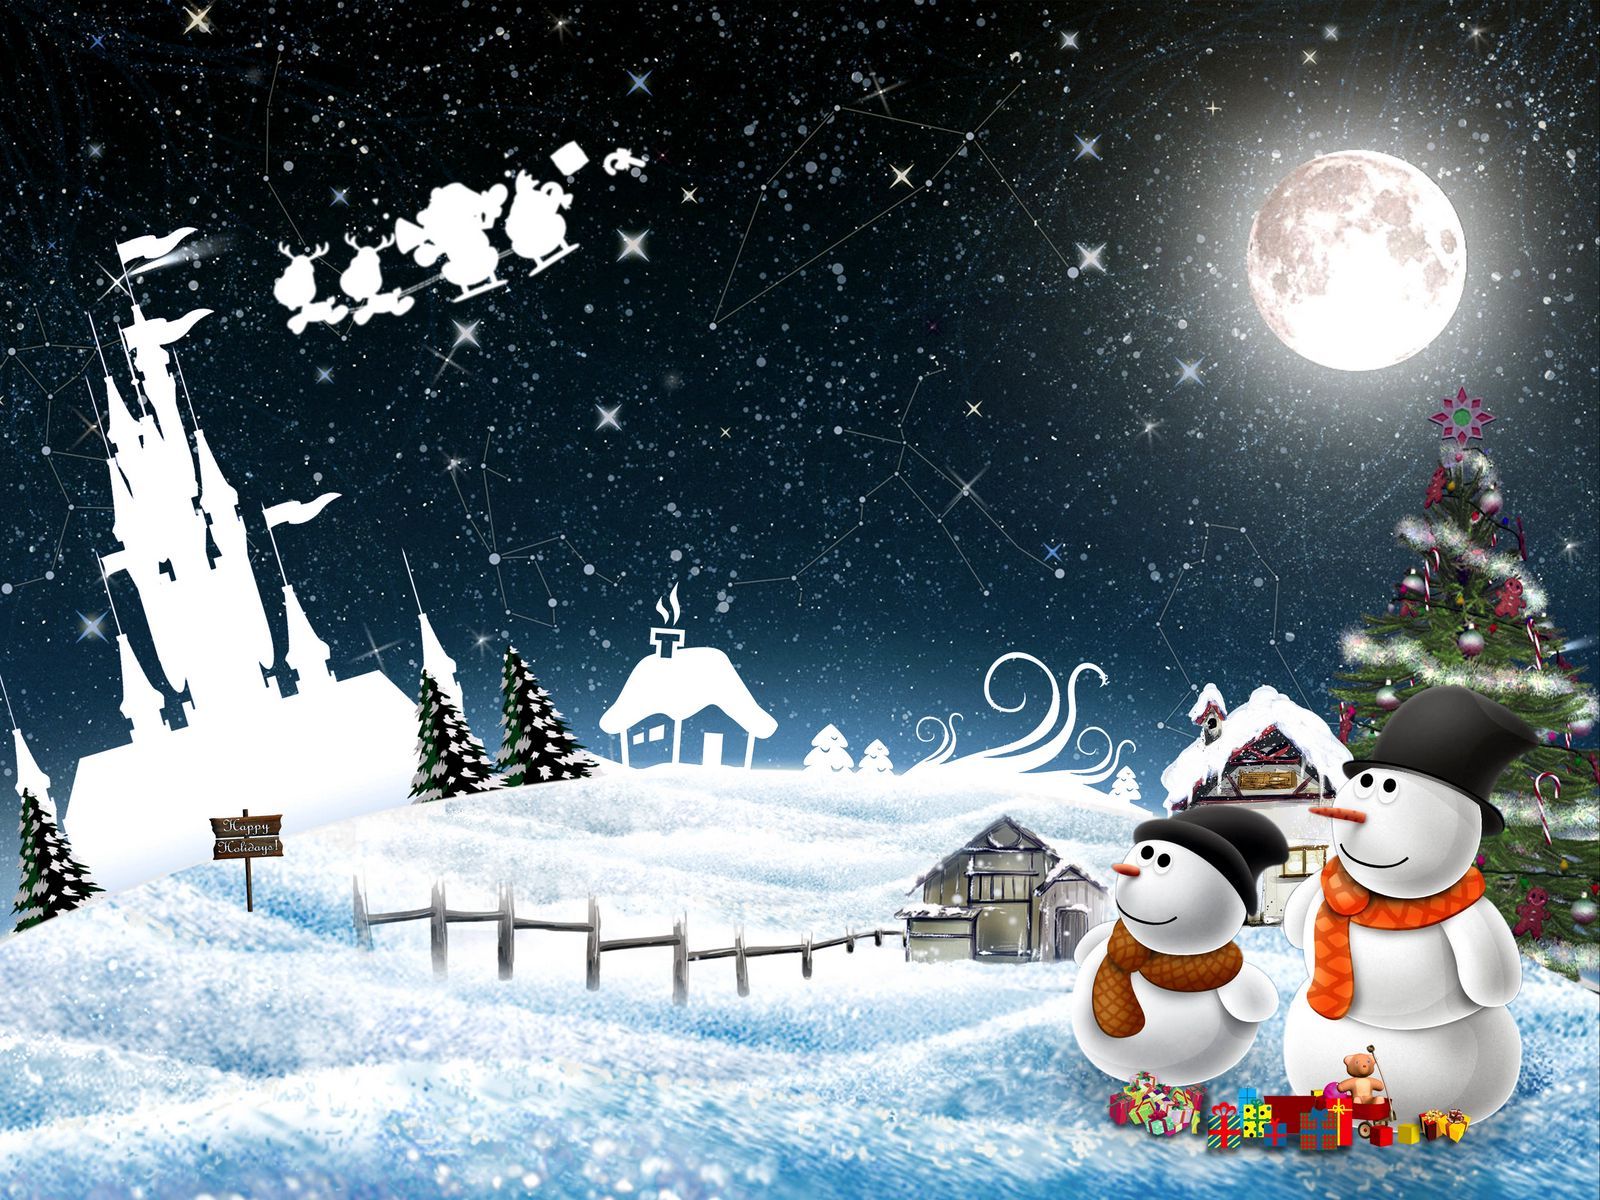 Download wallpaper 1600x1200 new year, snowmen, night, greeting, holiday, christmas standard 4:3 HD background